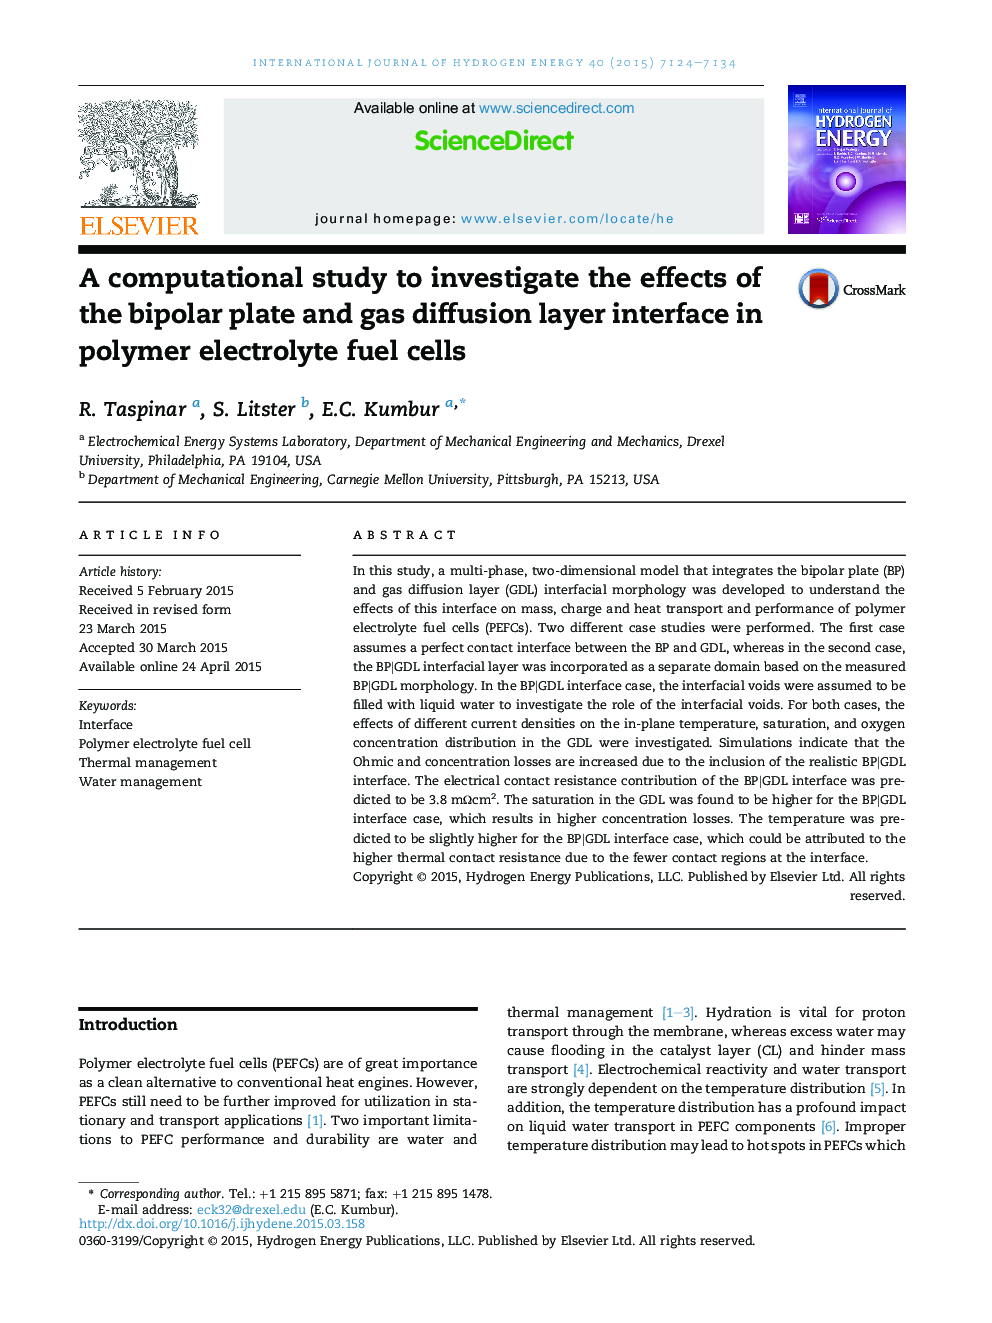 A computational study to investigate the effects of the bipolar plate and gas diffusion layer interface in polymer electrolyte fuel cells